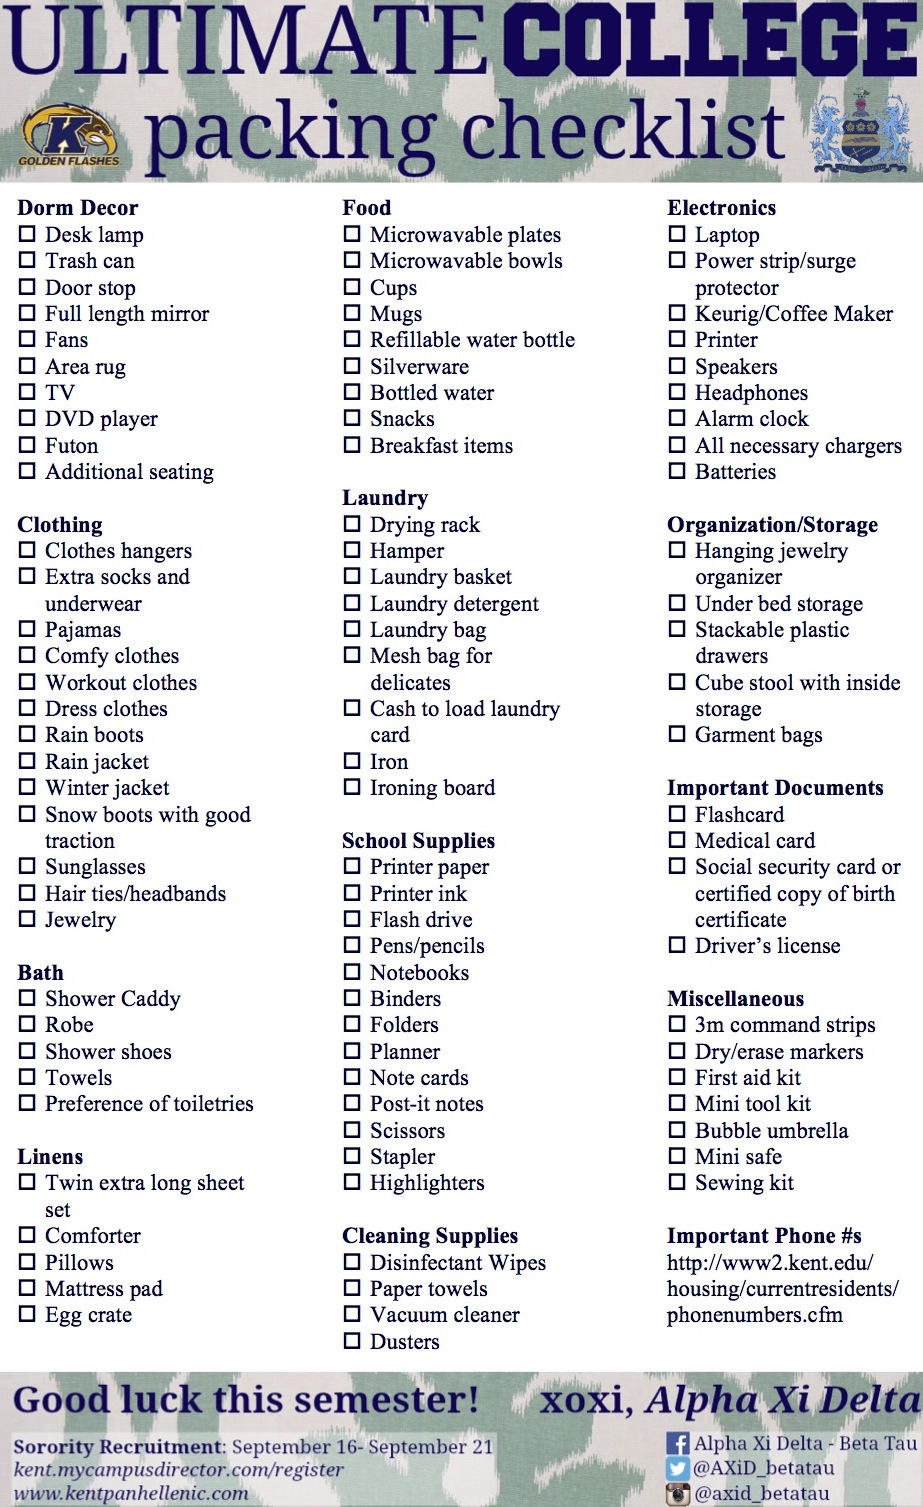 the-ultimate-college-packing-checklist-alpha-xi-delta-beta-tau-kent